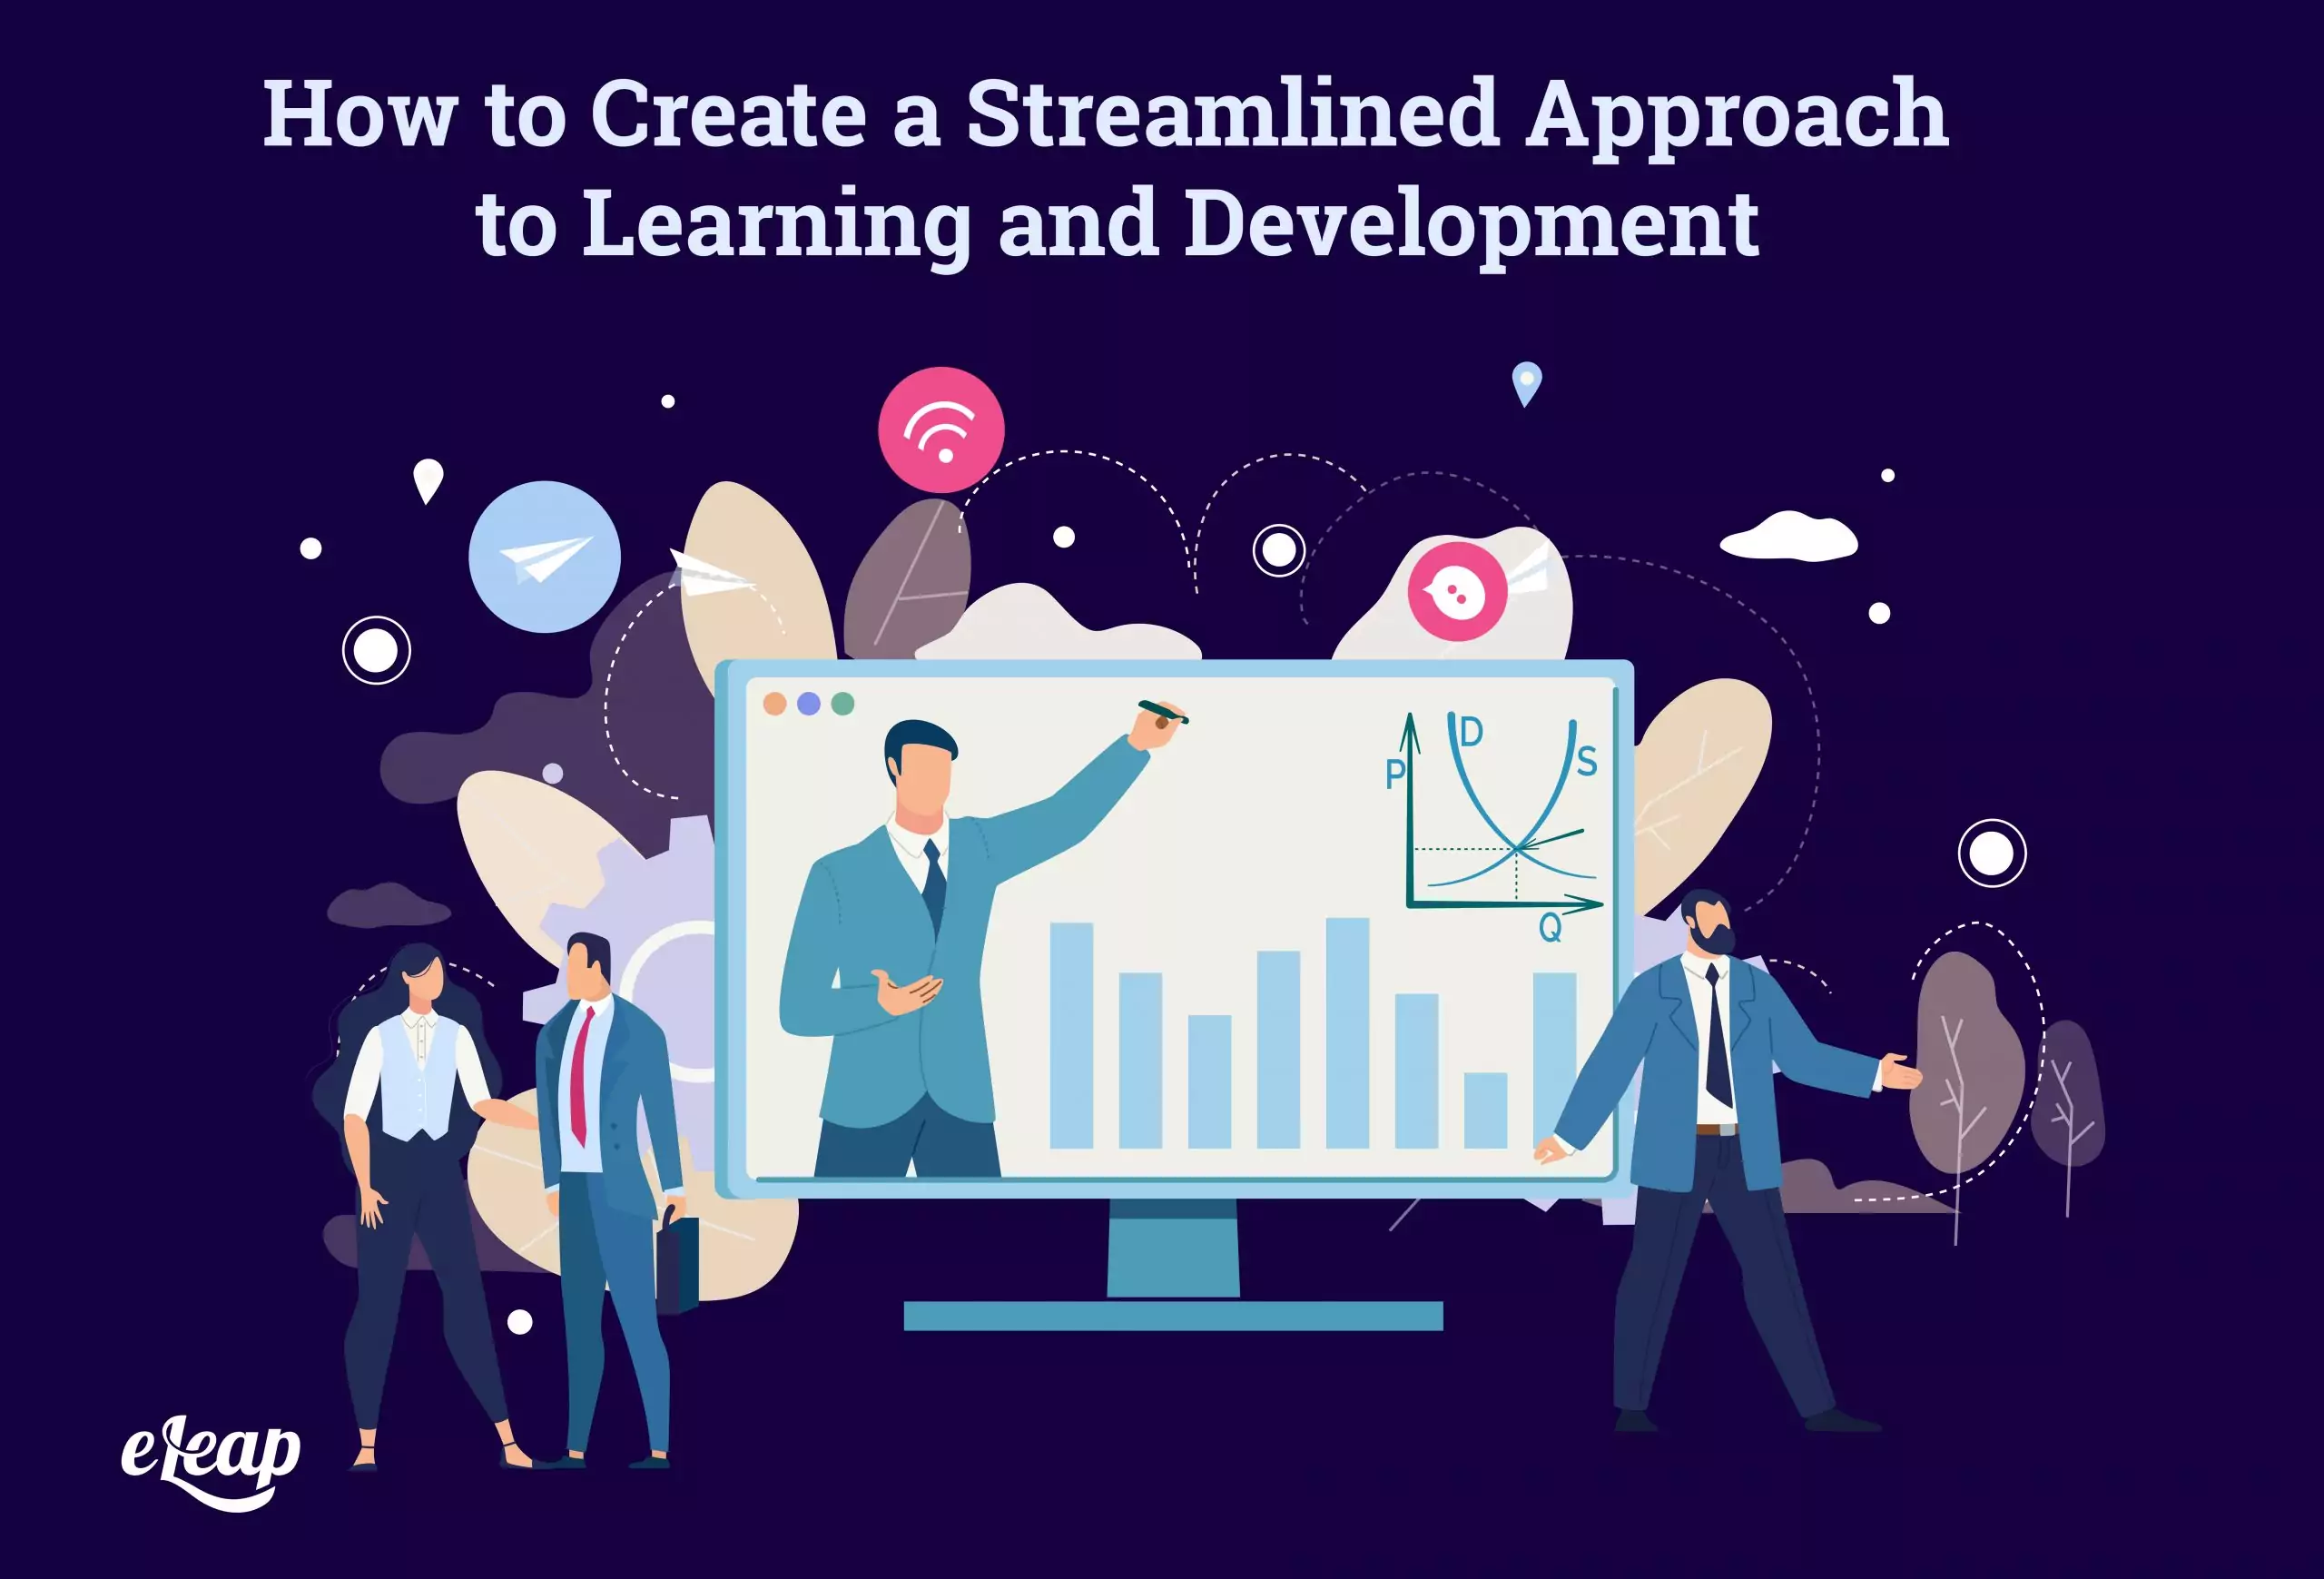 How to Create a Streamlined Approach to Learning and Development